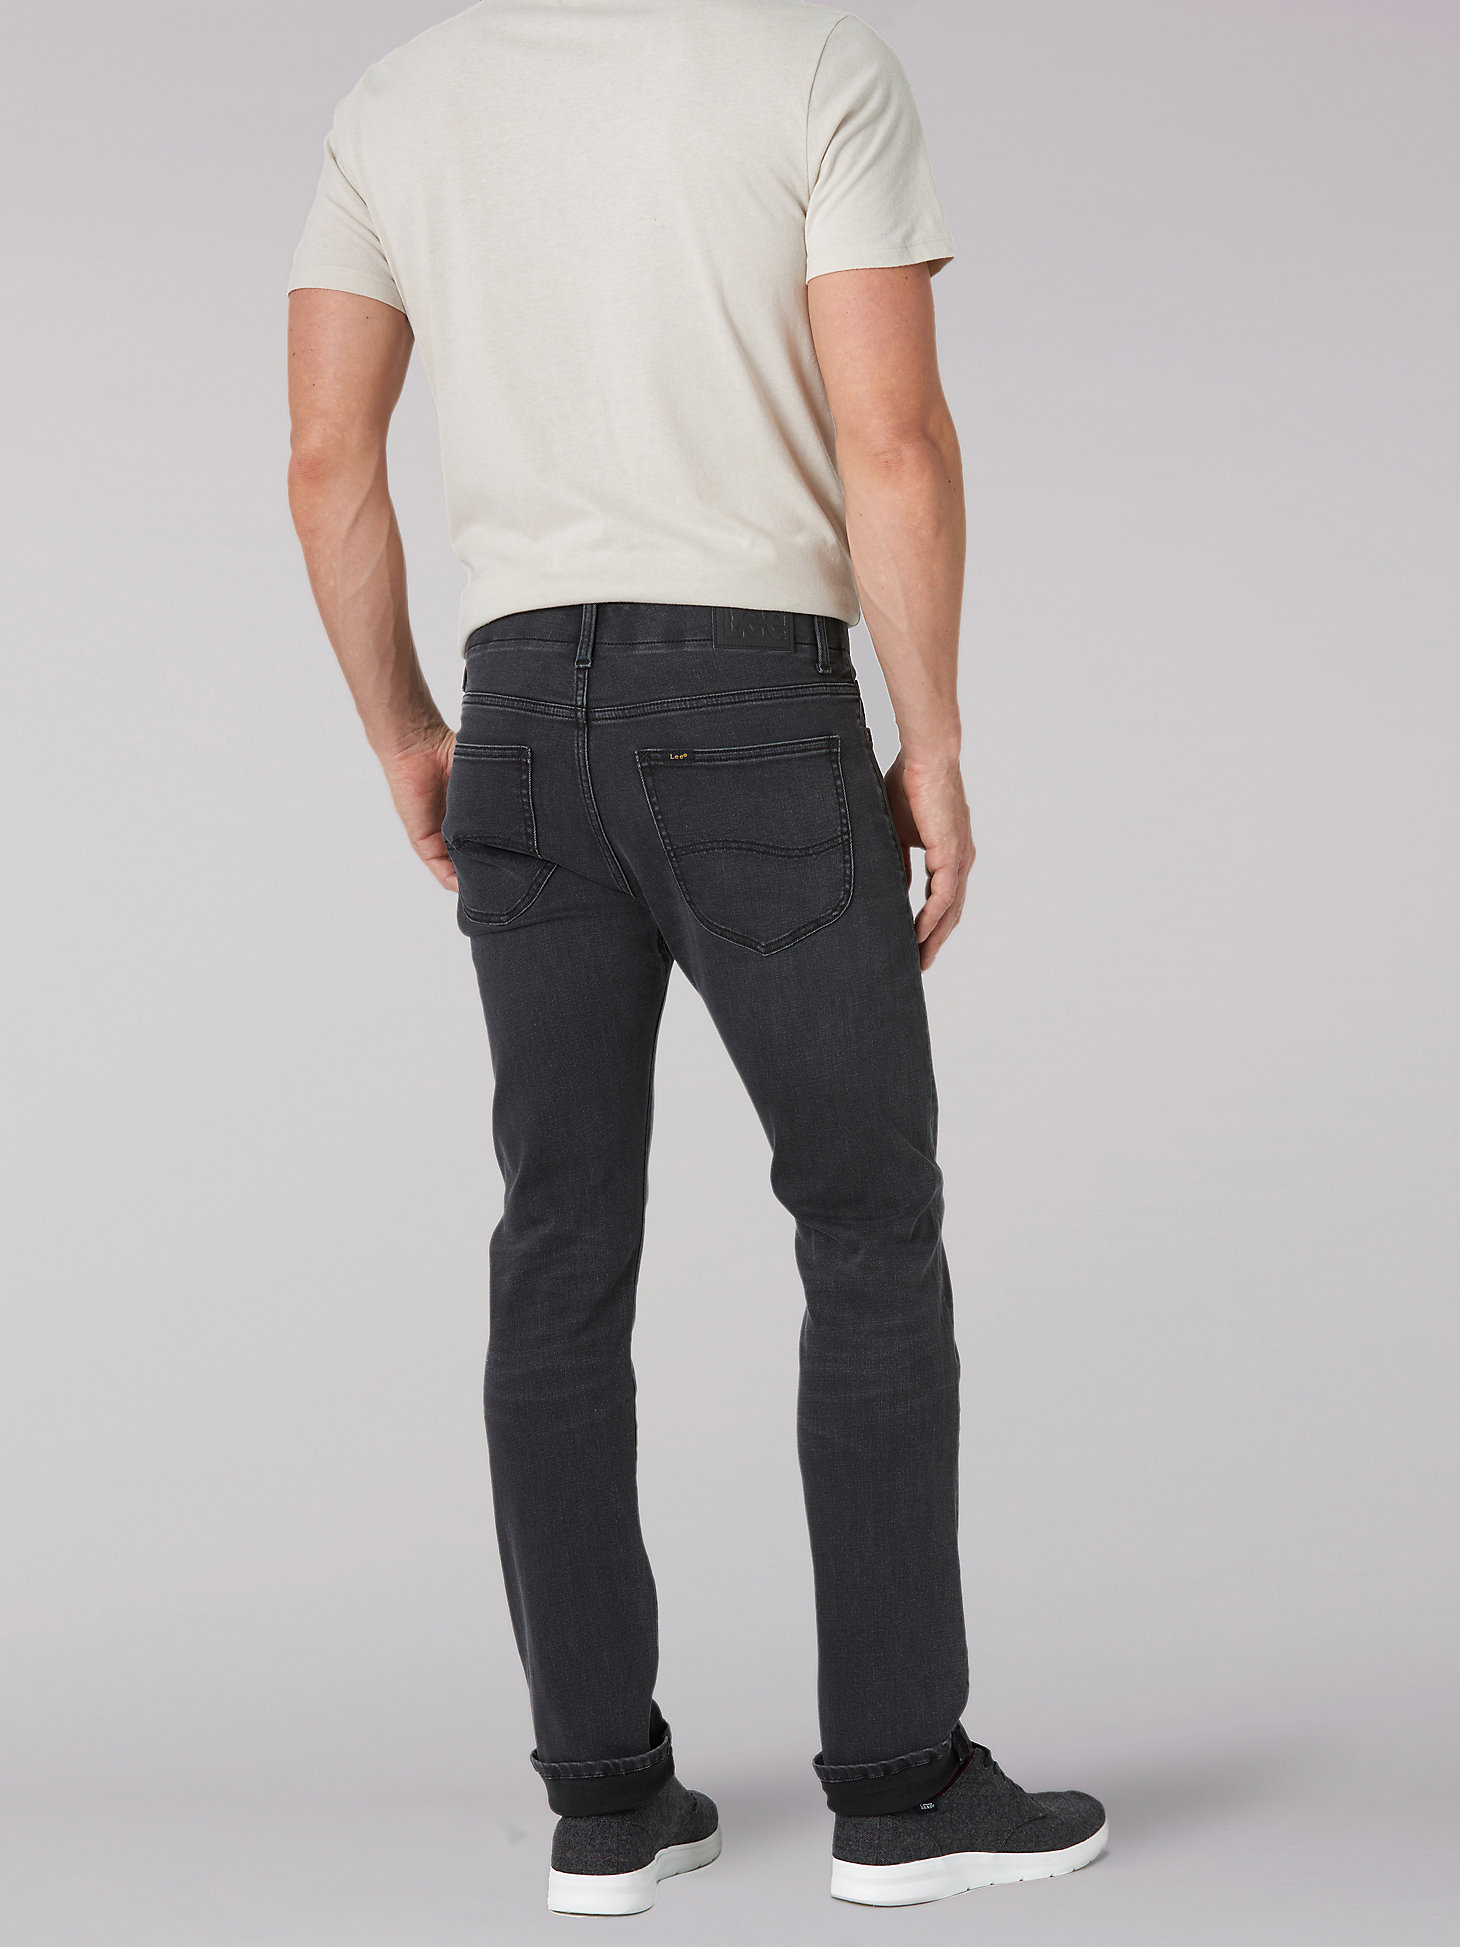 Men's Extreme Motion MVP Slim Fit Tapered Jean in Forge alternative view 1